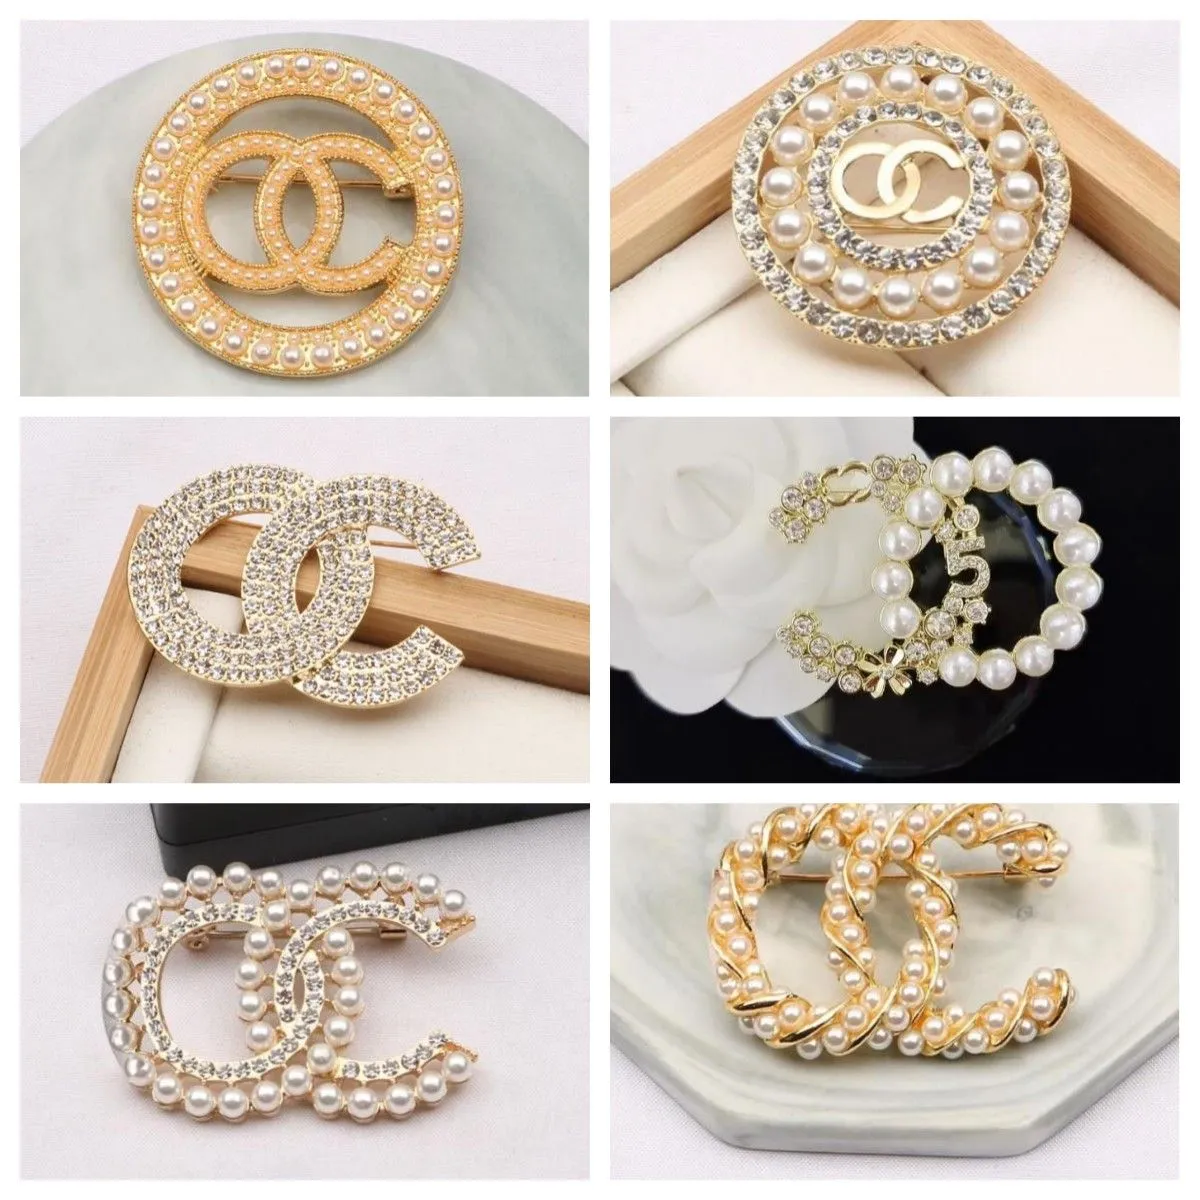 Elegant Luxury Brand Double Letters Designer Brooches for Fashion Women Crystal Pearl Brooch Pin Women Wedding Jewelry Party Accessory Gift 20style